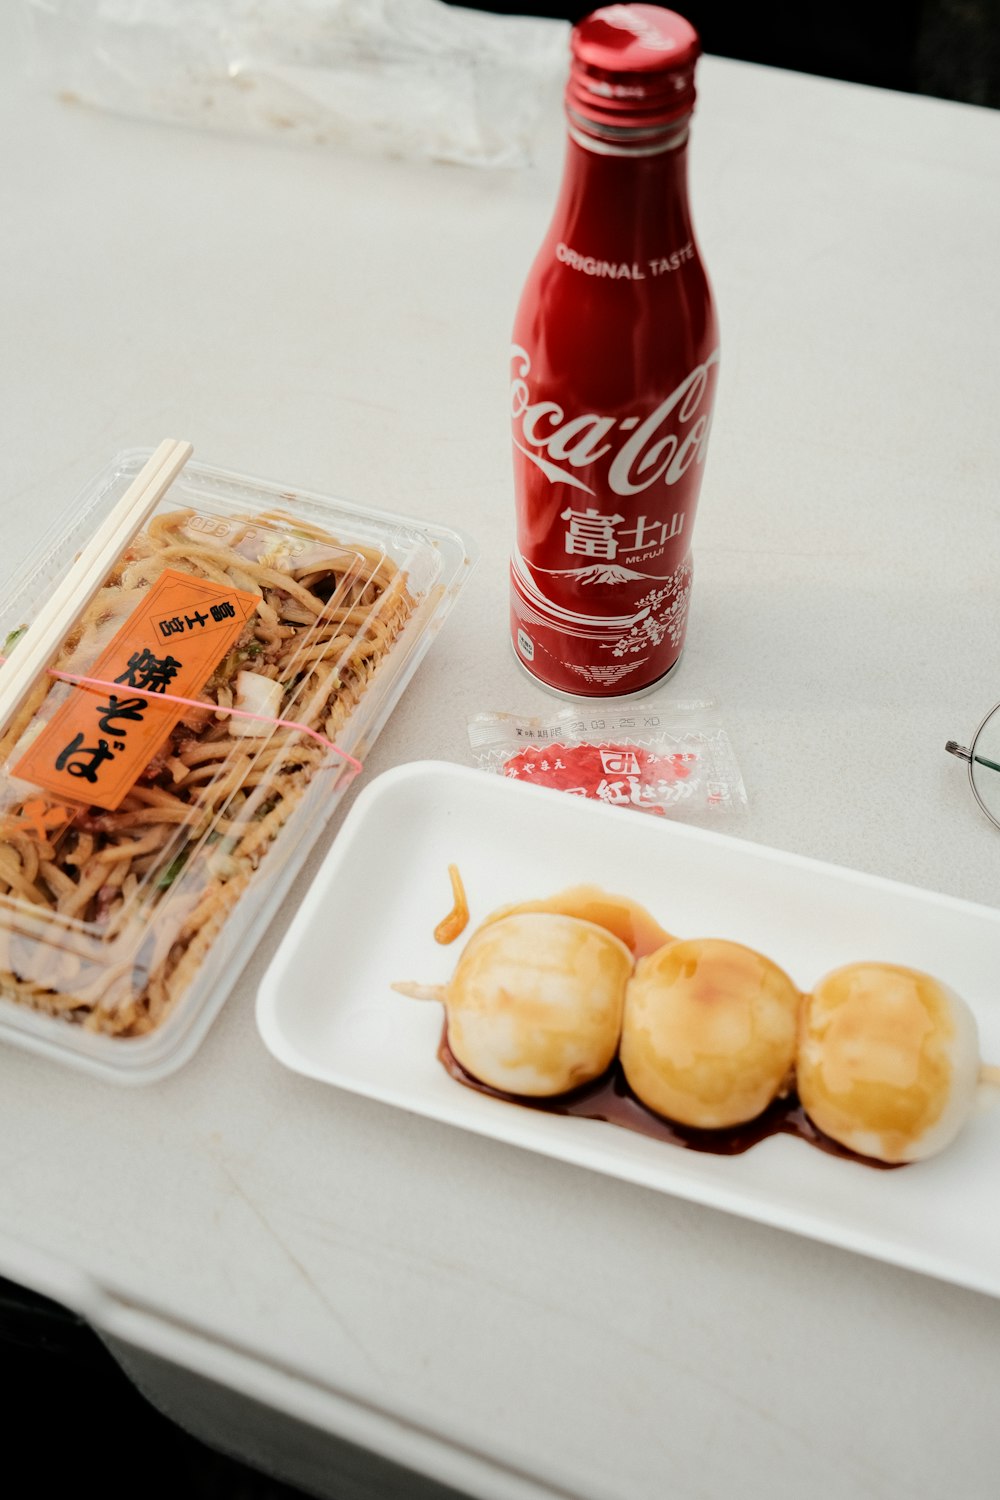 a bottle of coca cola and some food on a table